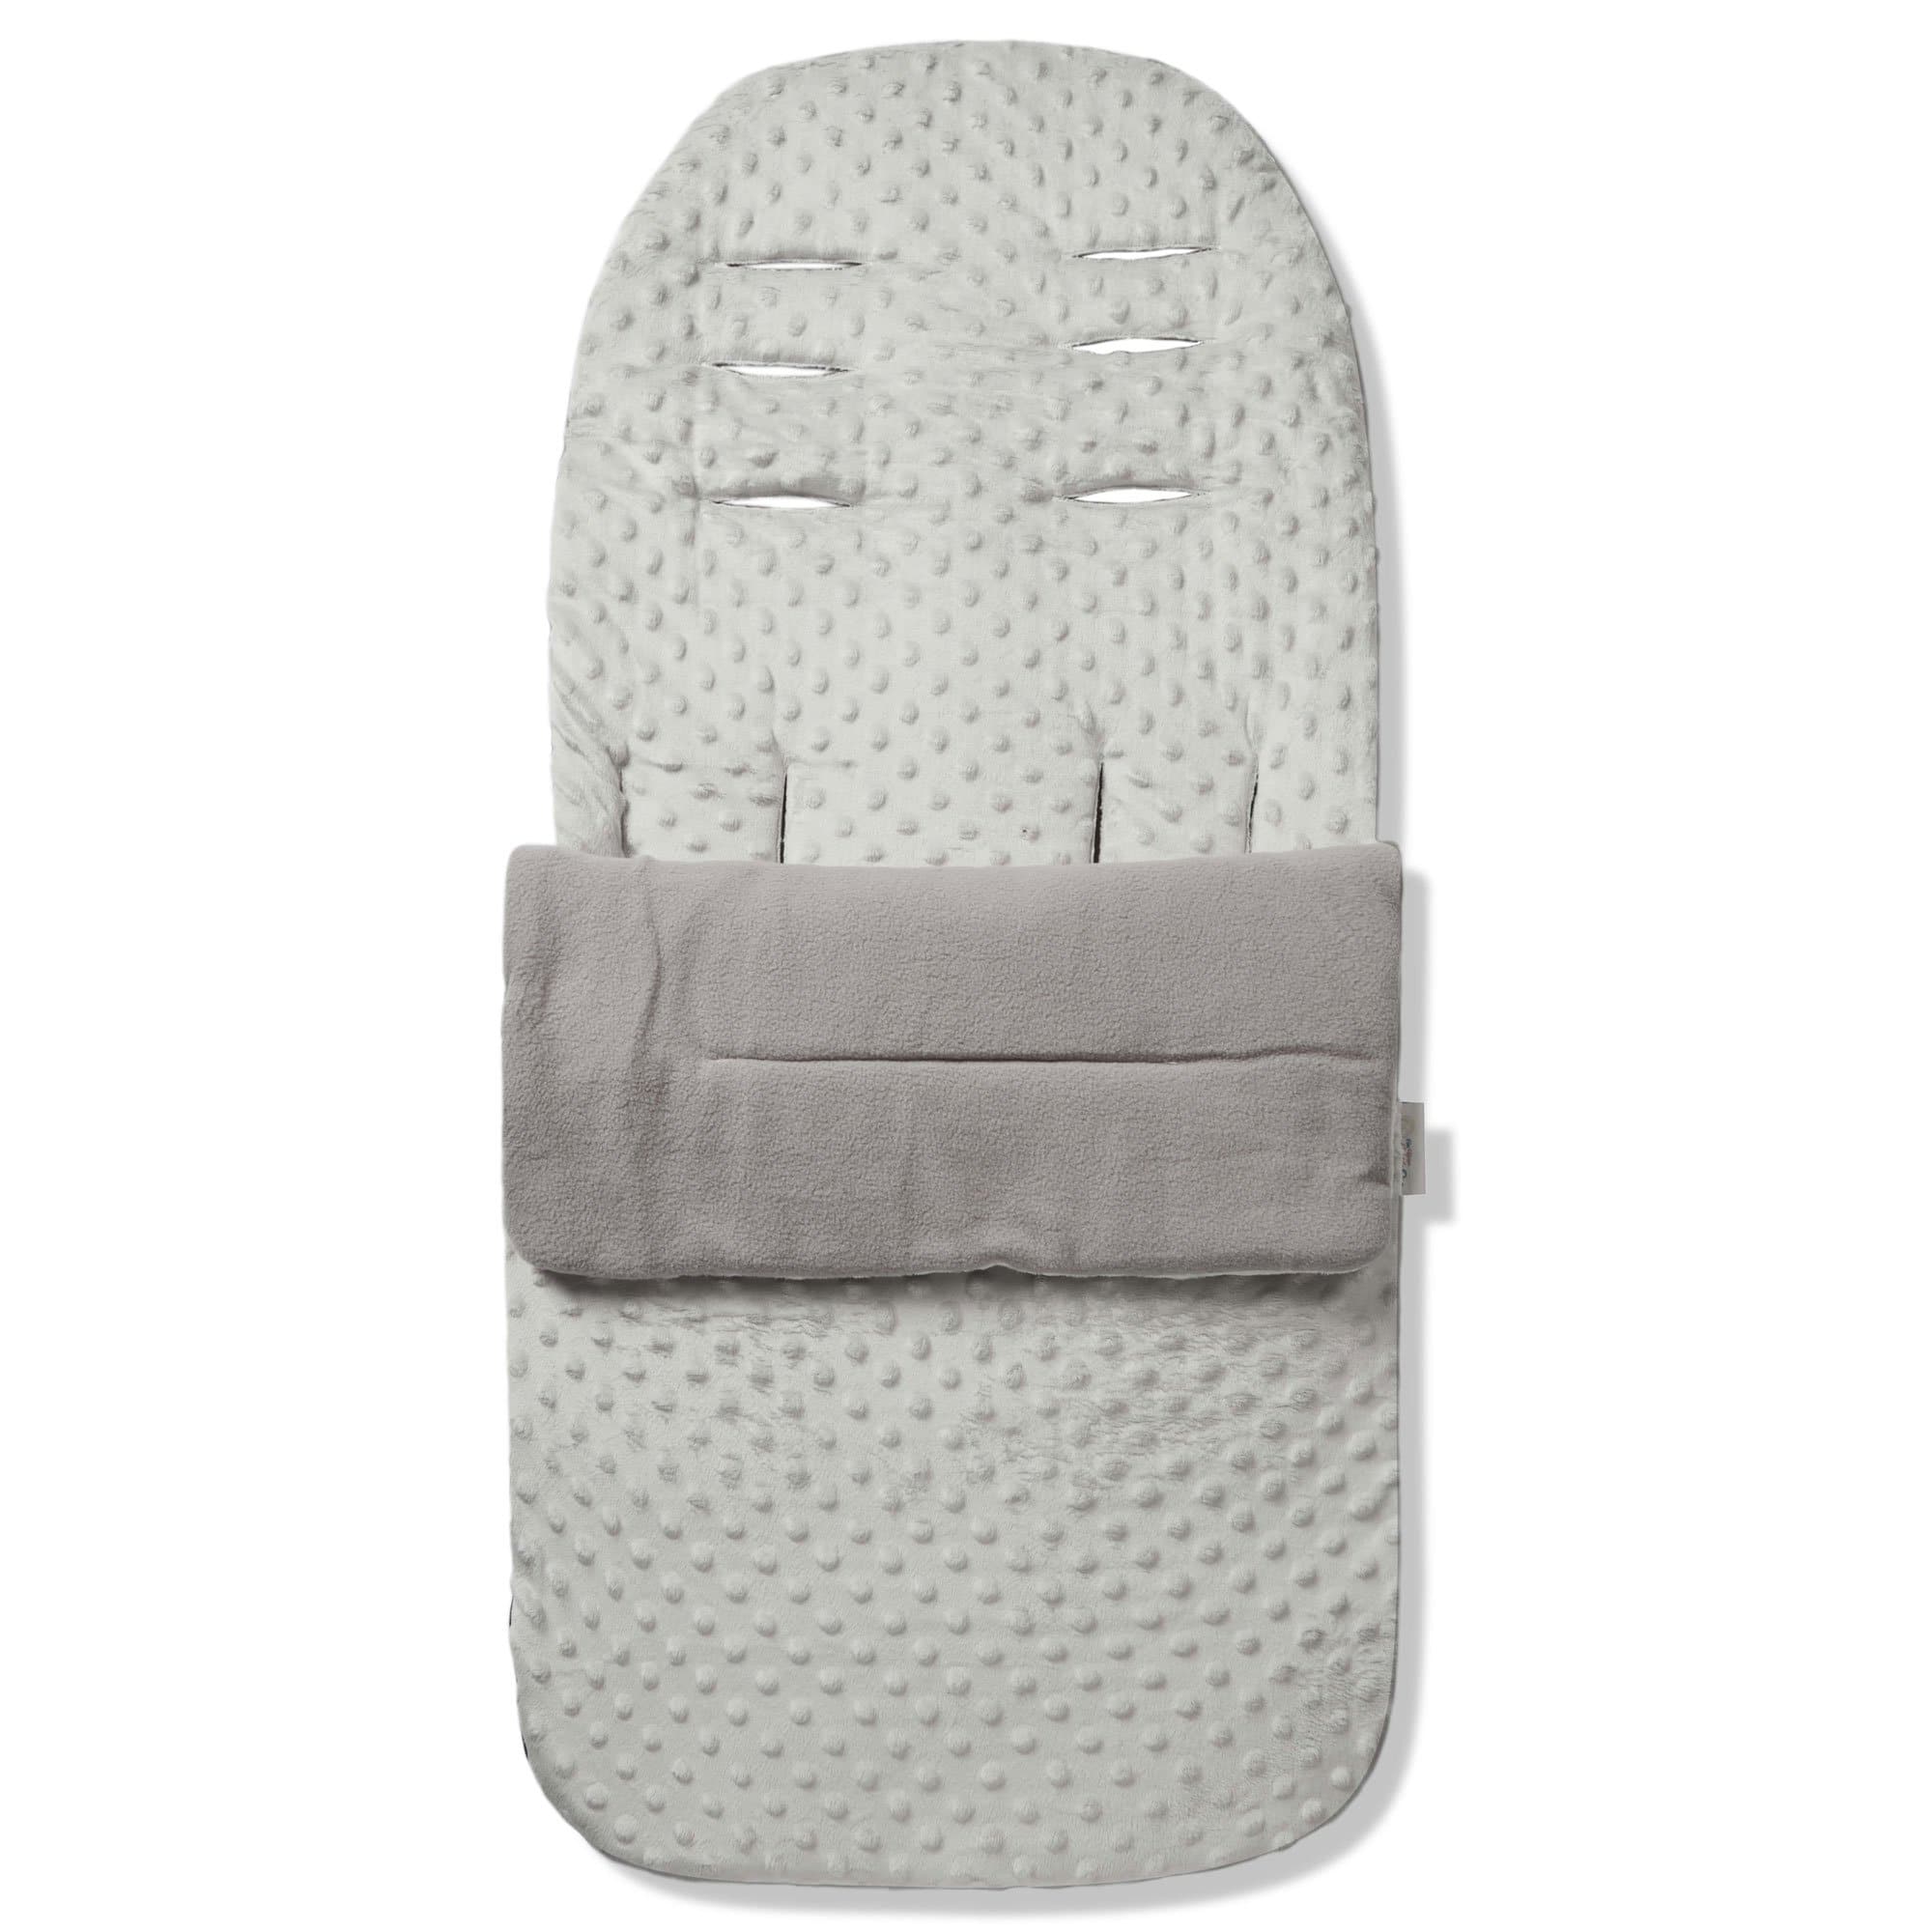 Dimple Footmuff / Cosy Toes Compatible with Safety 1st - Grey / Fits All Models | For Your Little One